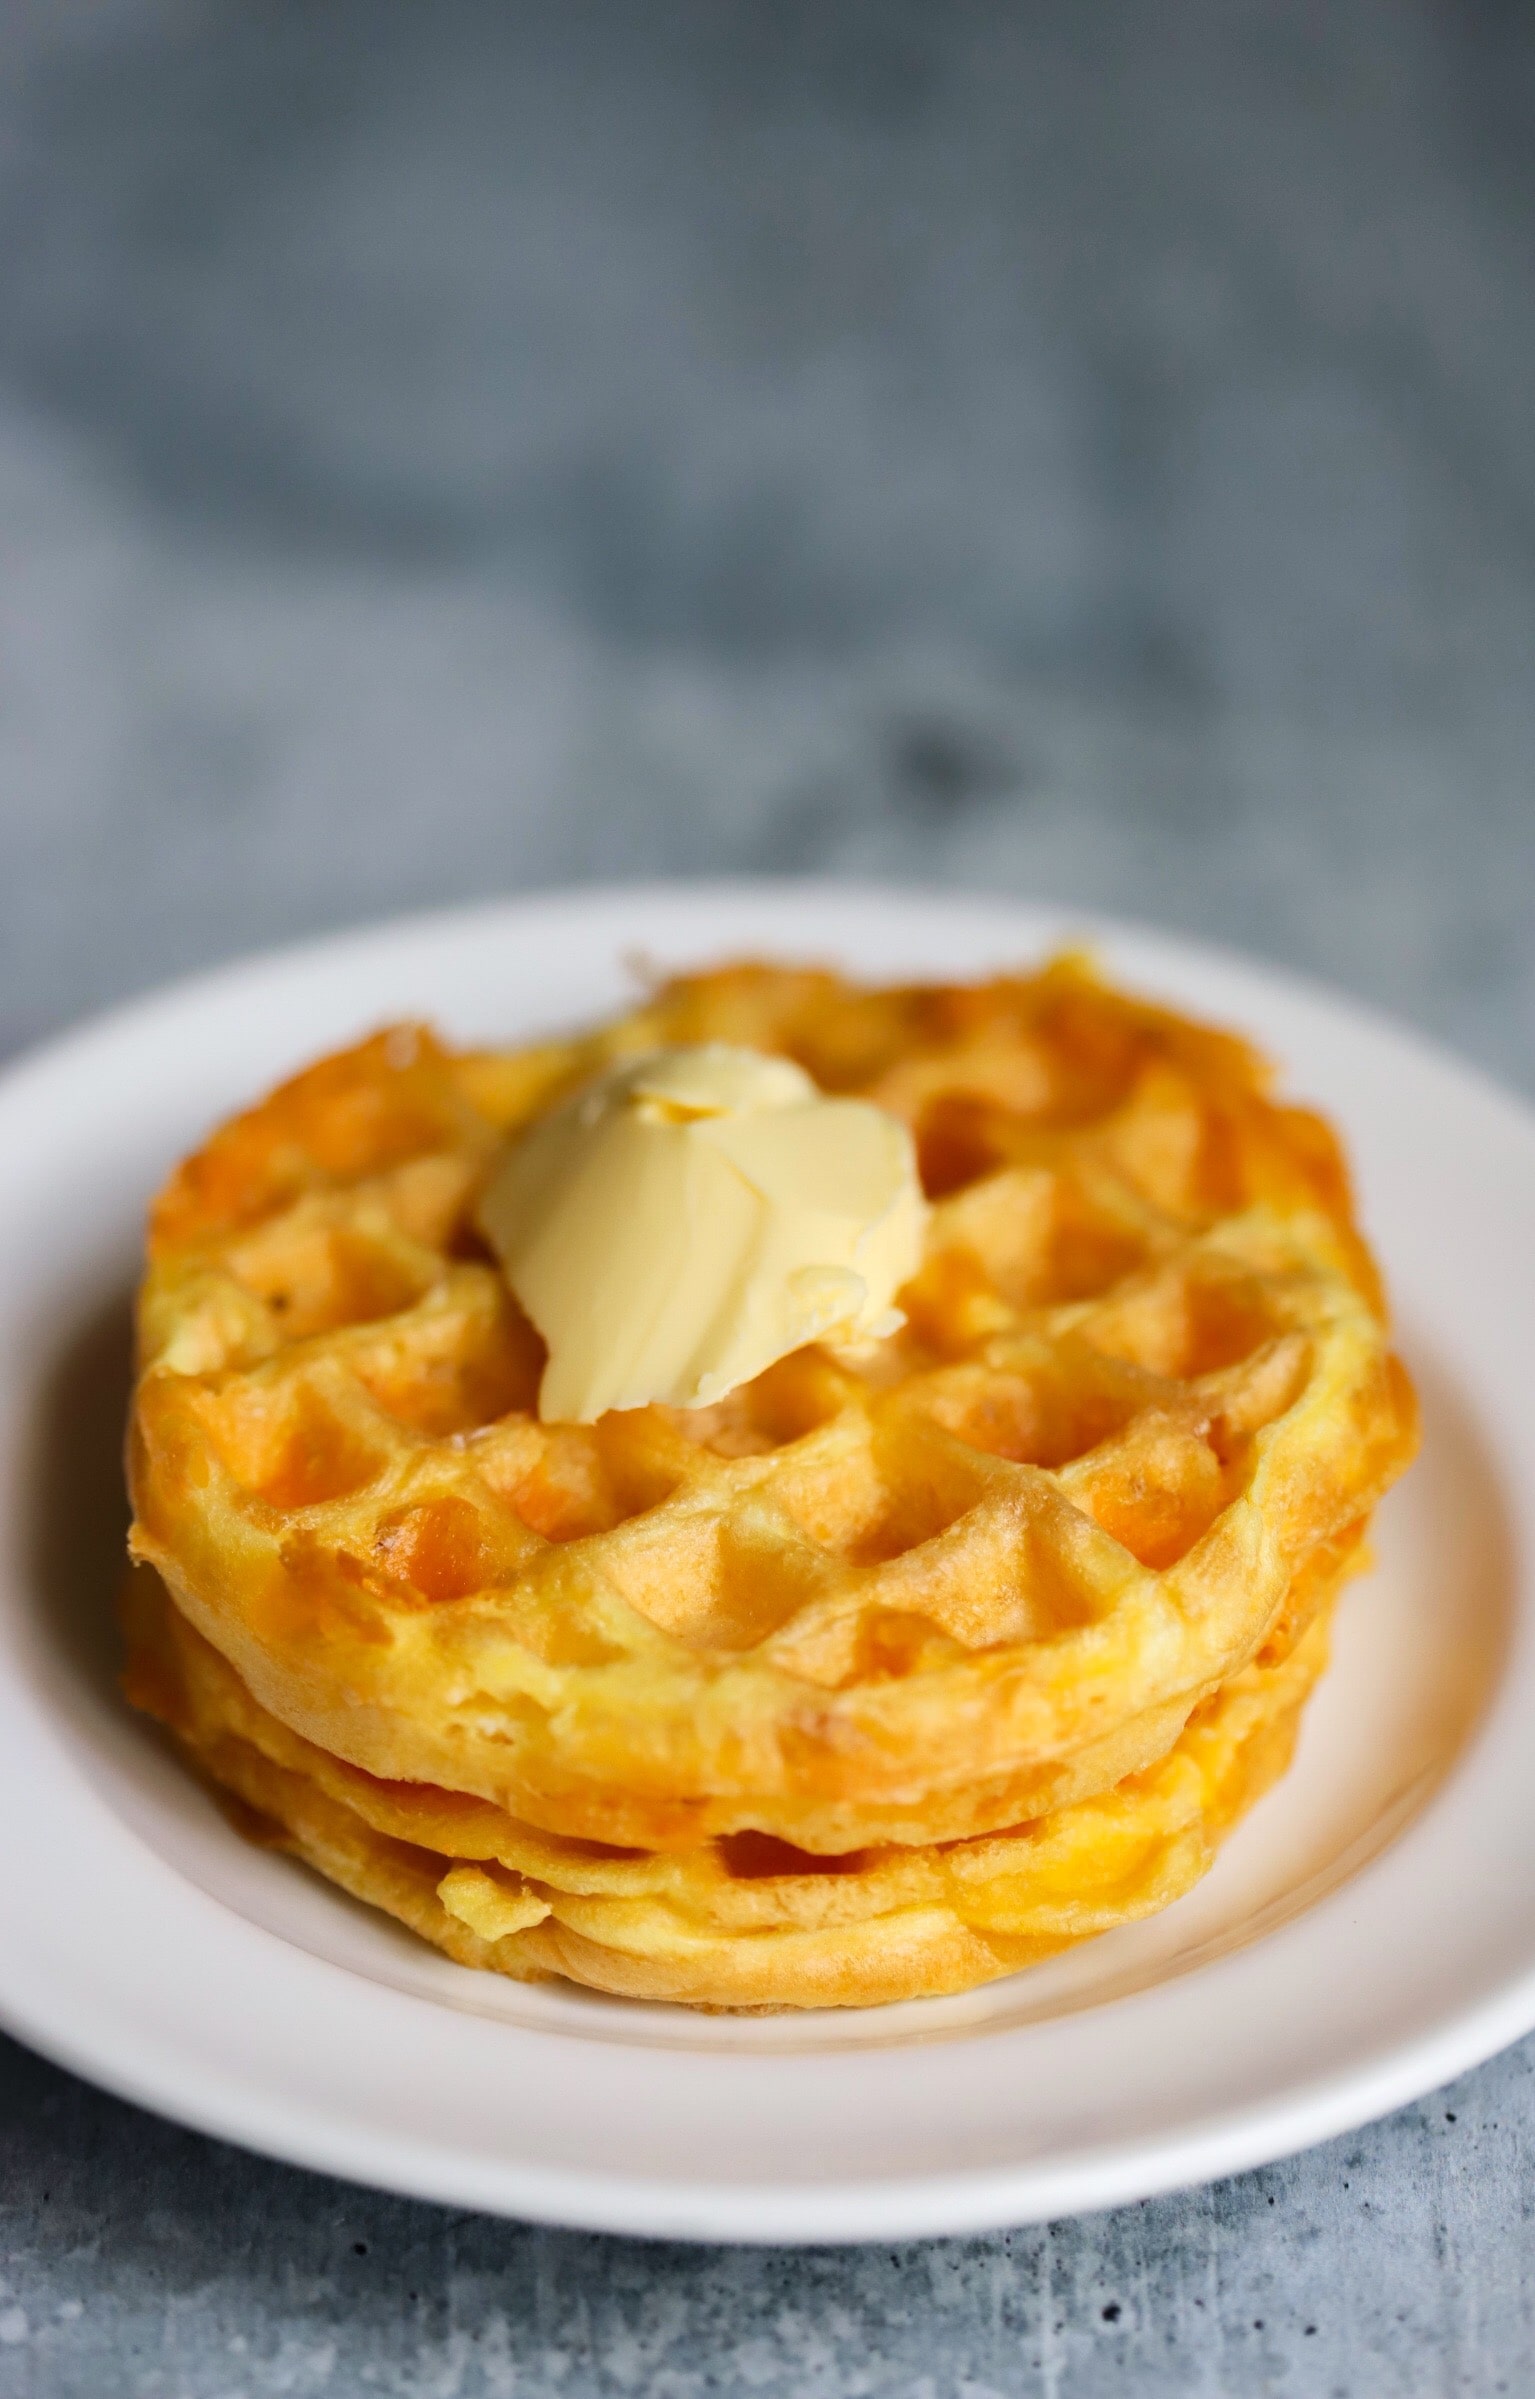 Keto Chaffle Recipes - Only 4 Ingredient Chaffle Waffle Recipes